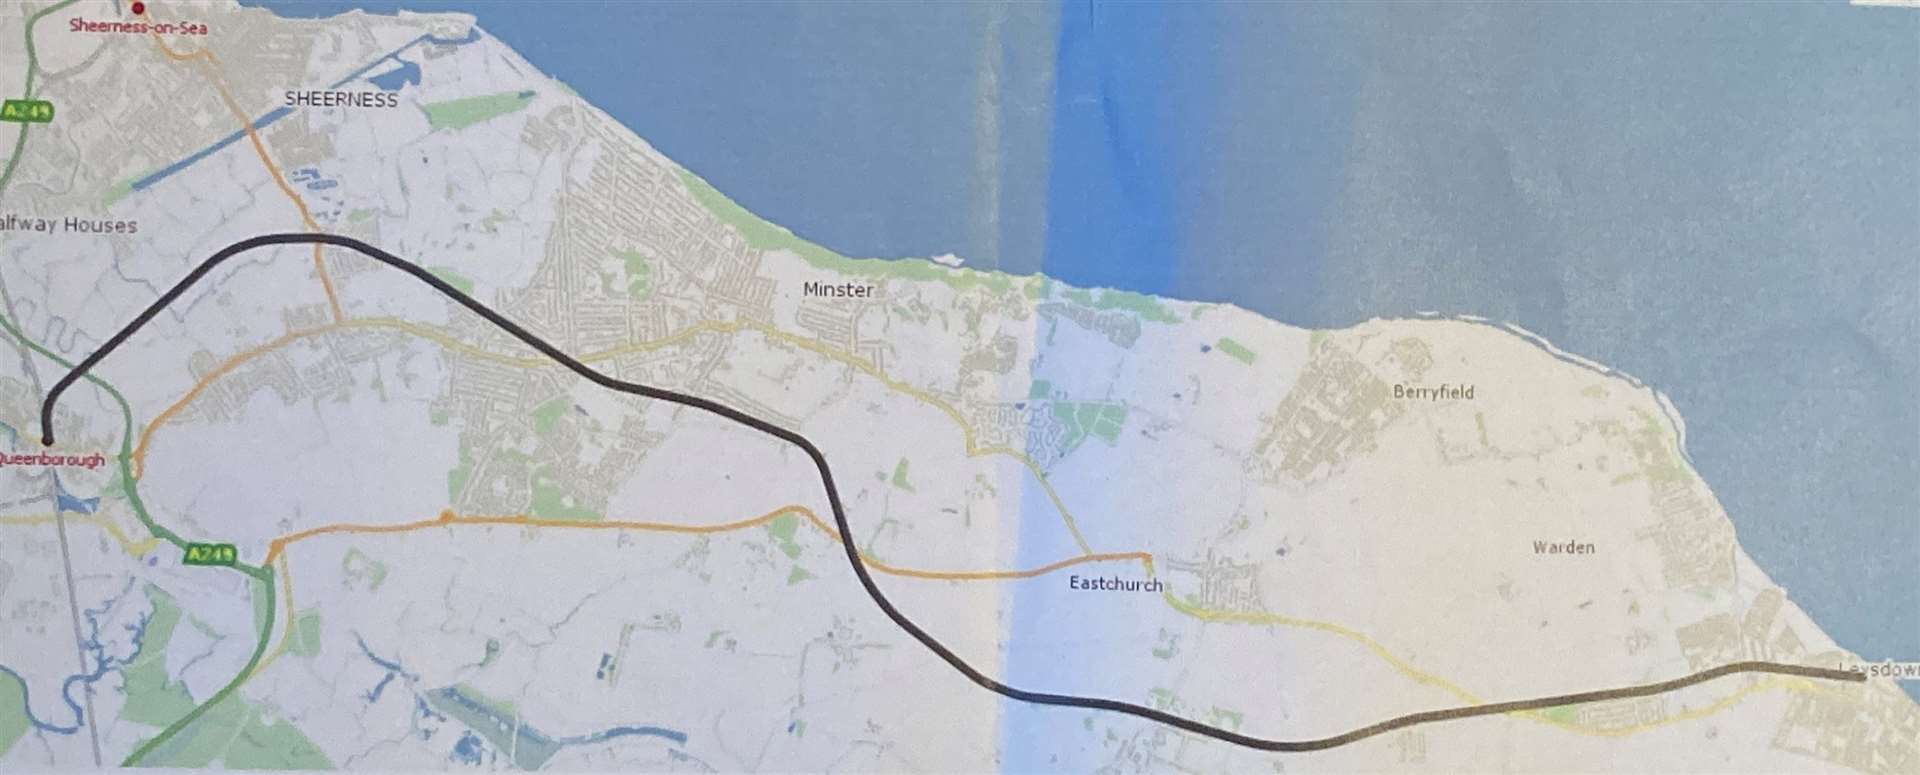 The original route of the Sheppey Light Railway which went from Queenborough to Leysdown. Now it could become part of a 'greenway' for cyclists and walkers